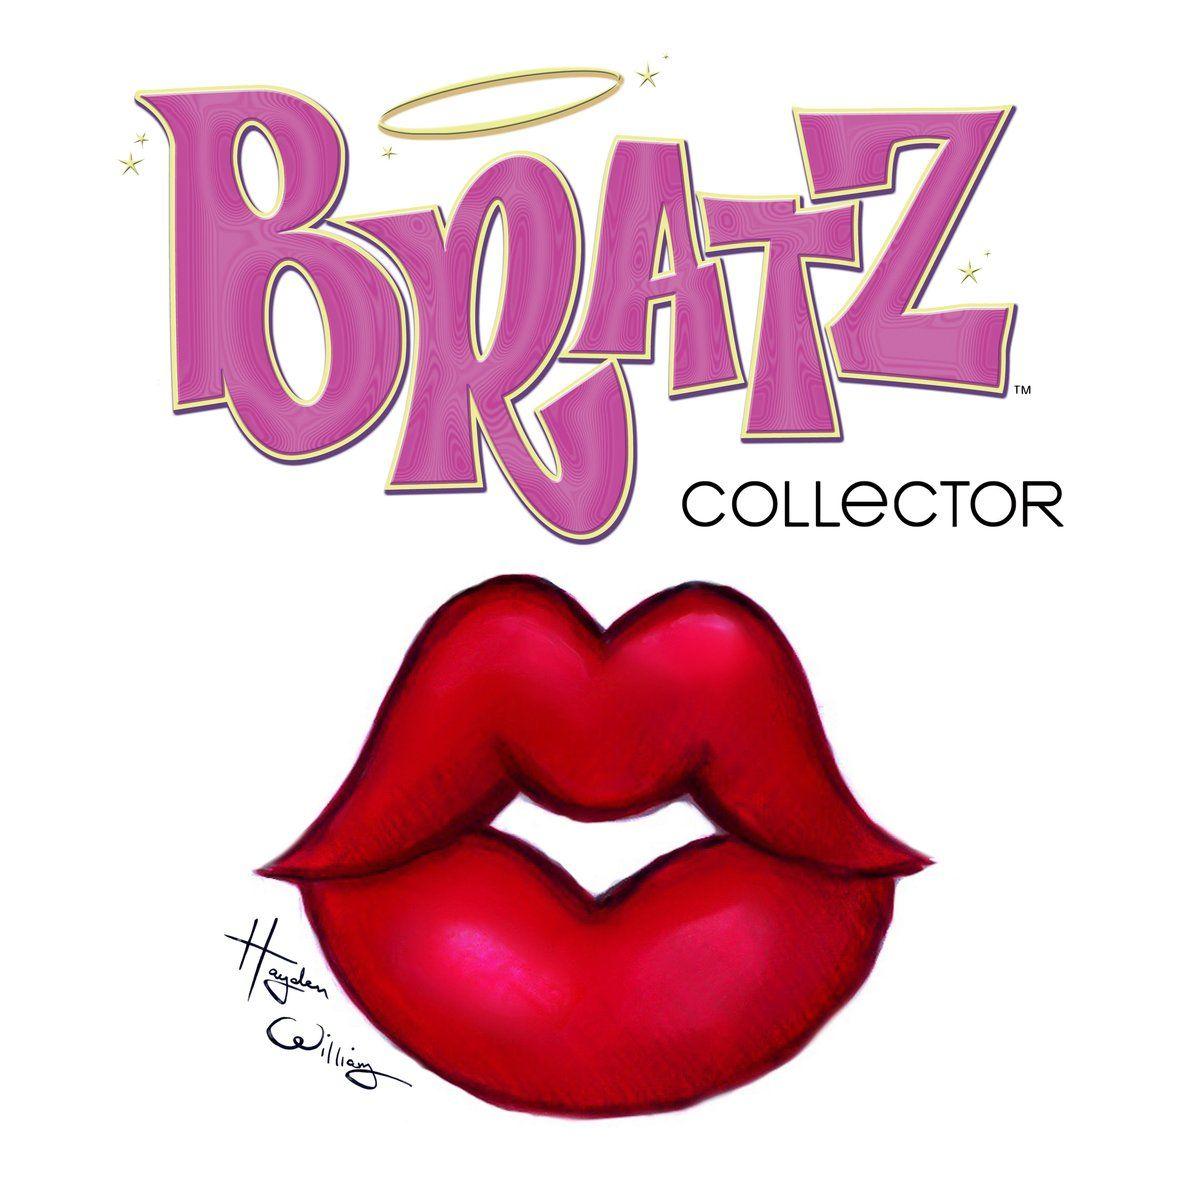 Bratz Logo - BRATZ are coming back in Fall 2018! - YouLoveIt.com